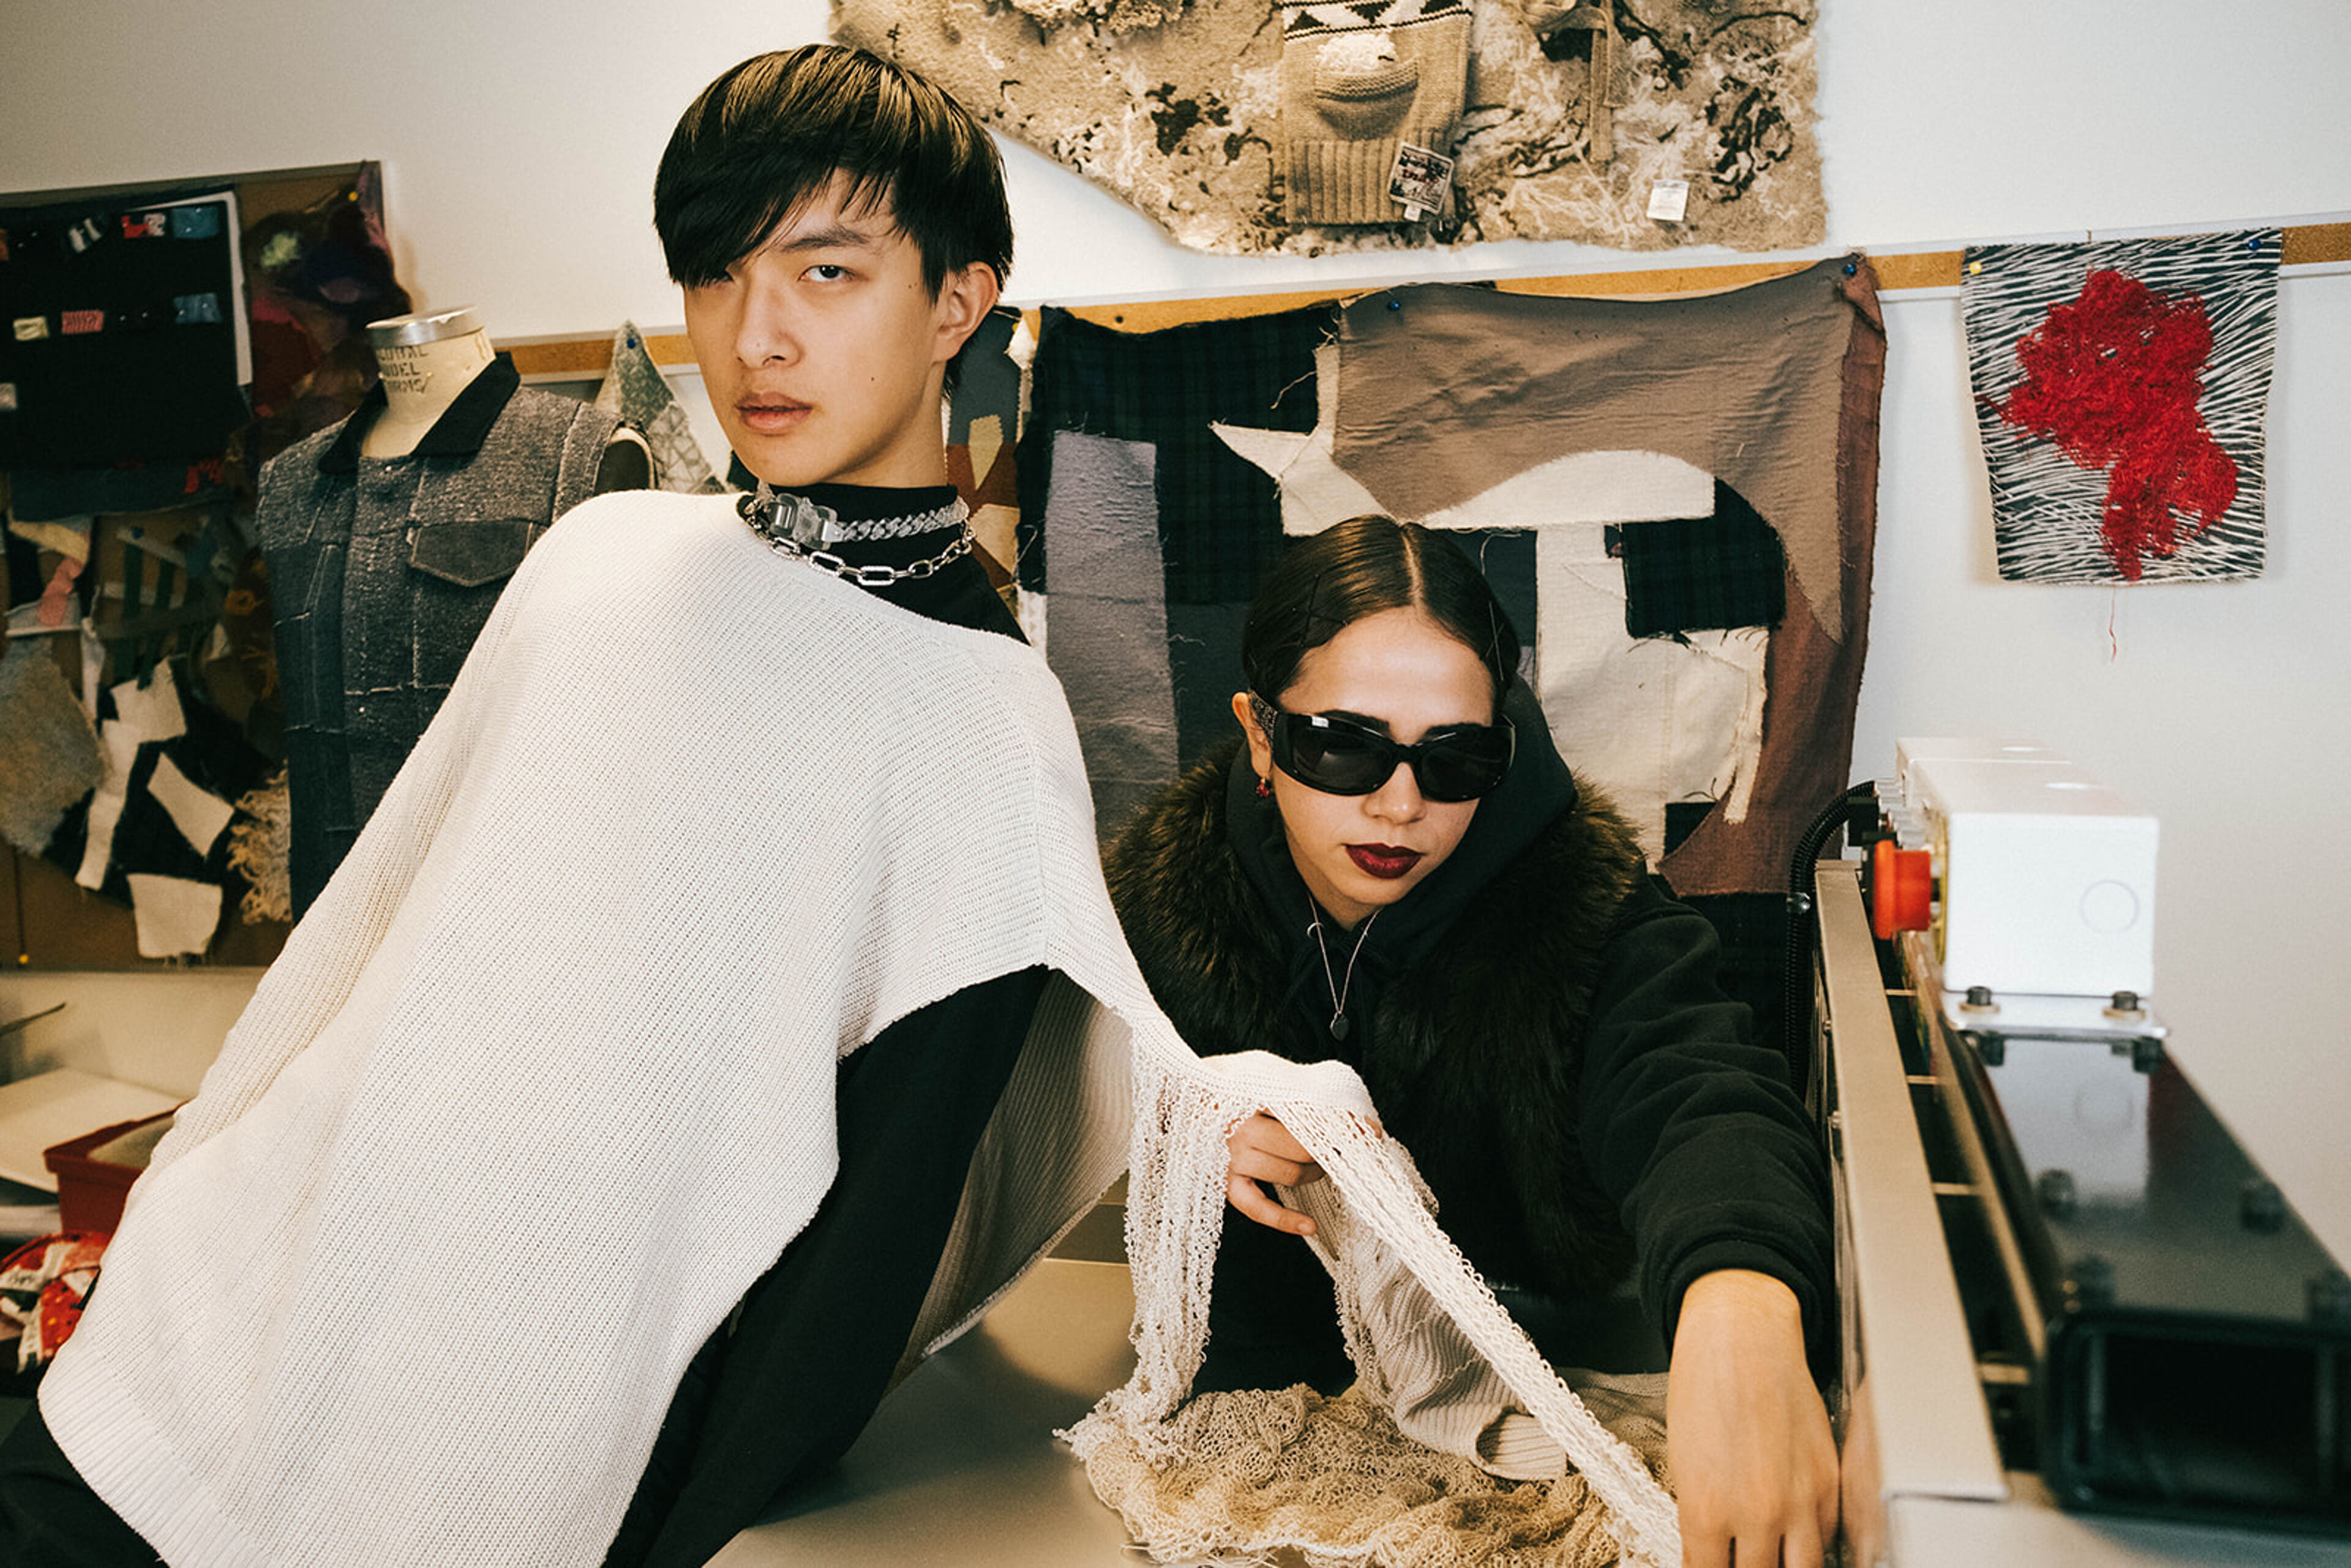 Two fashion designers in a creative studio, with textile samples and a sewing machine in the background.